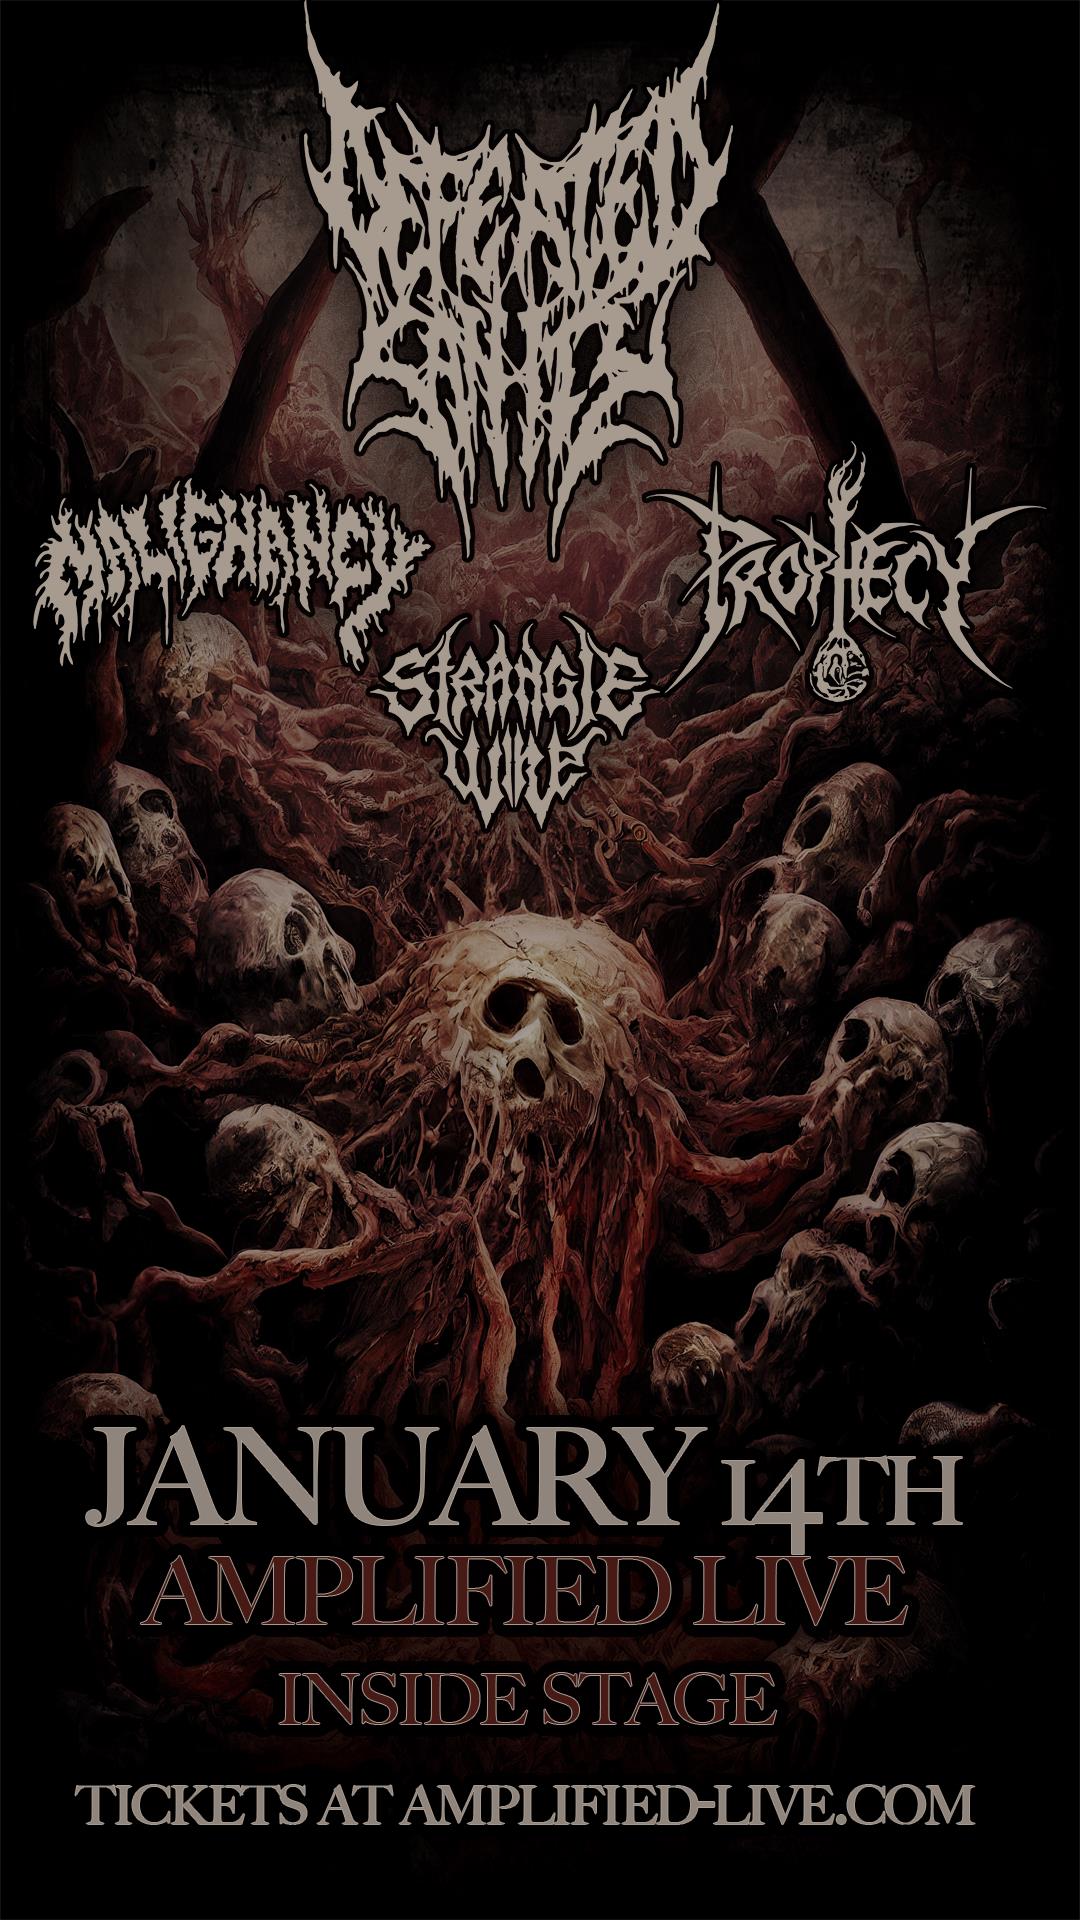 Defeated Sanity – INSIDE STAGE